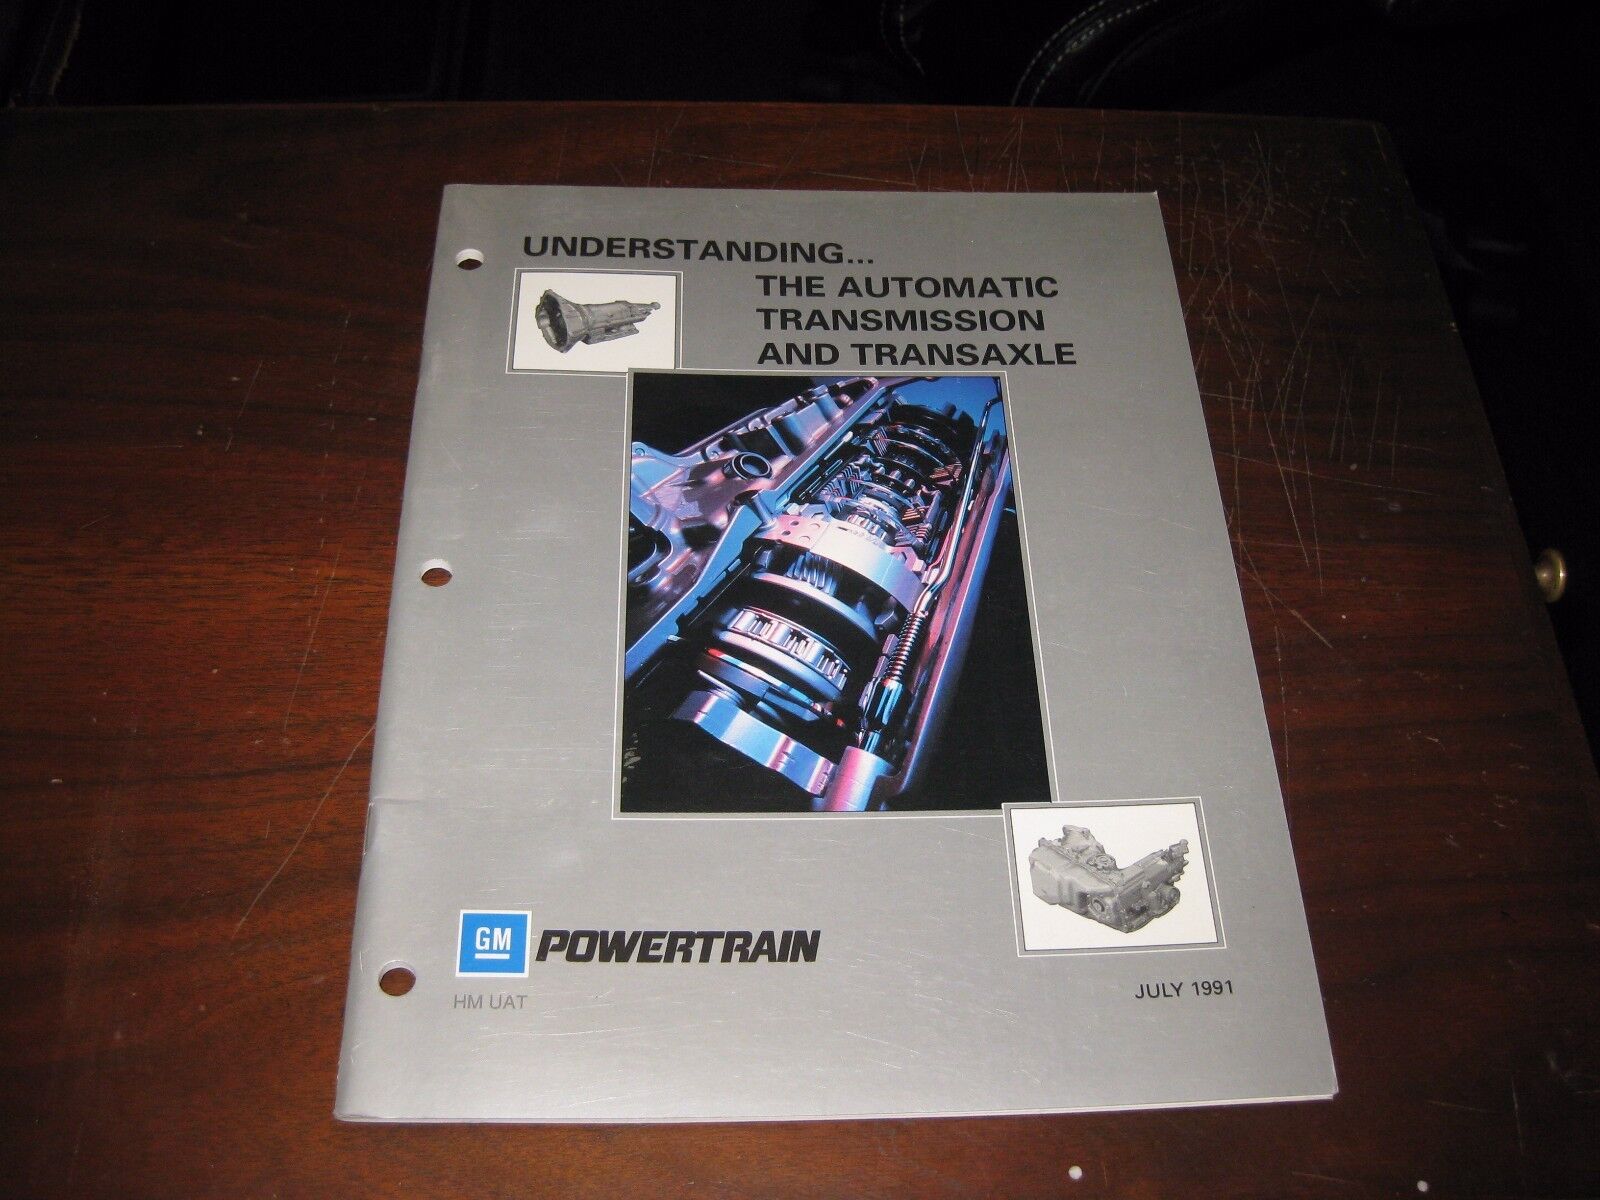  GM UNDERSTANDING THE  AUTO TRANSMISSION AND TRANSAXLE  JULY 1991